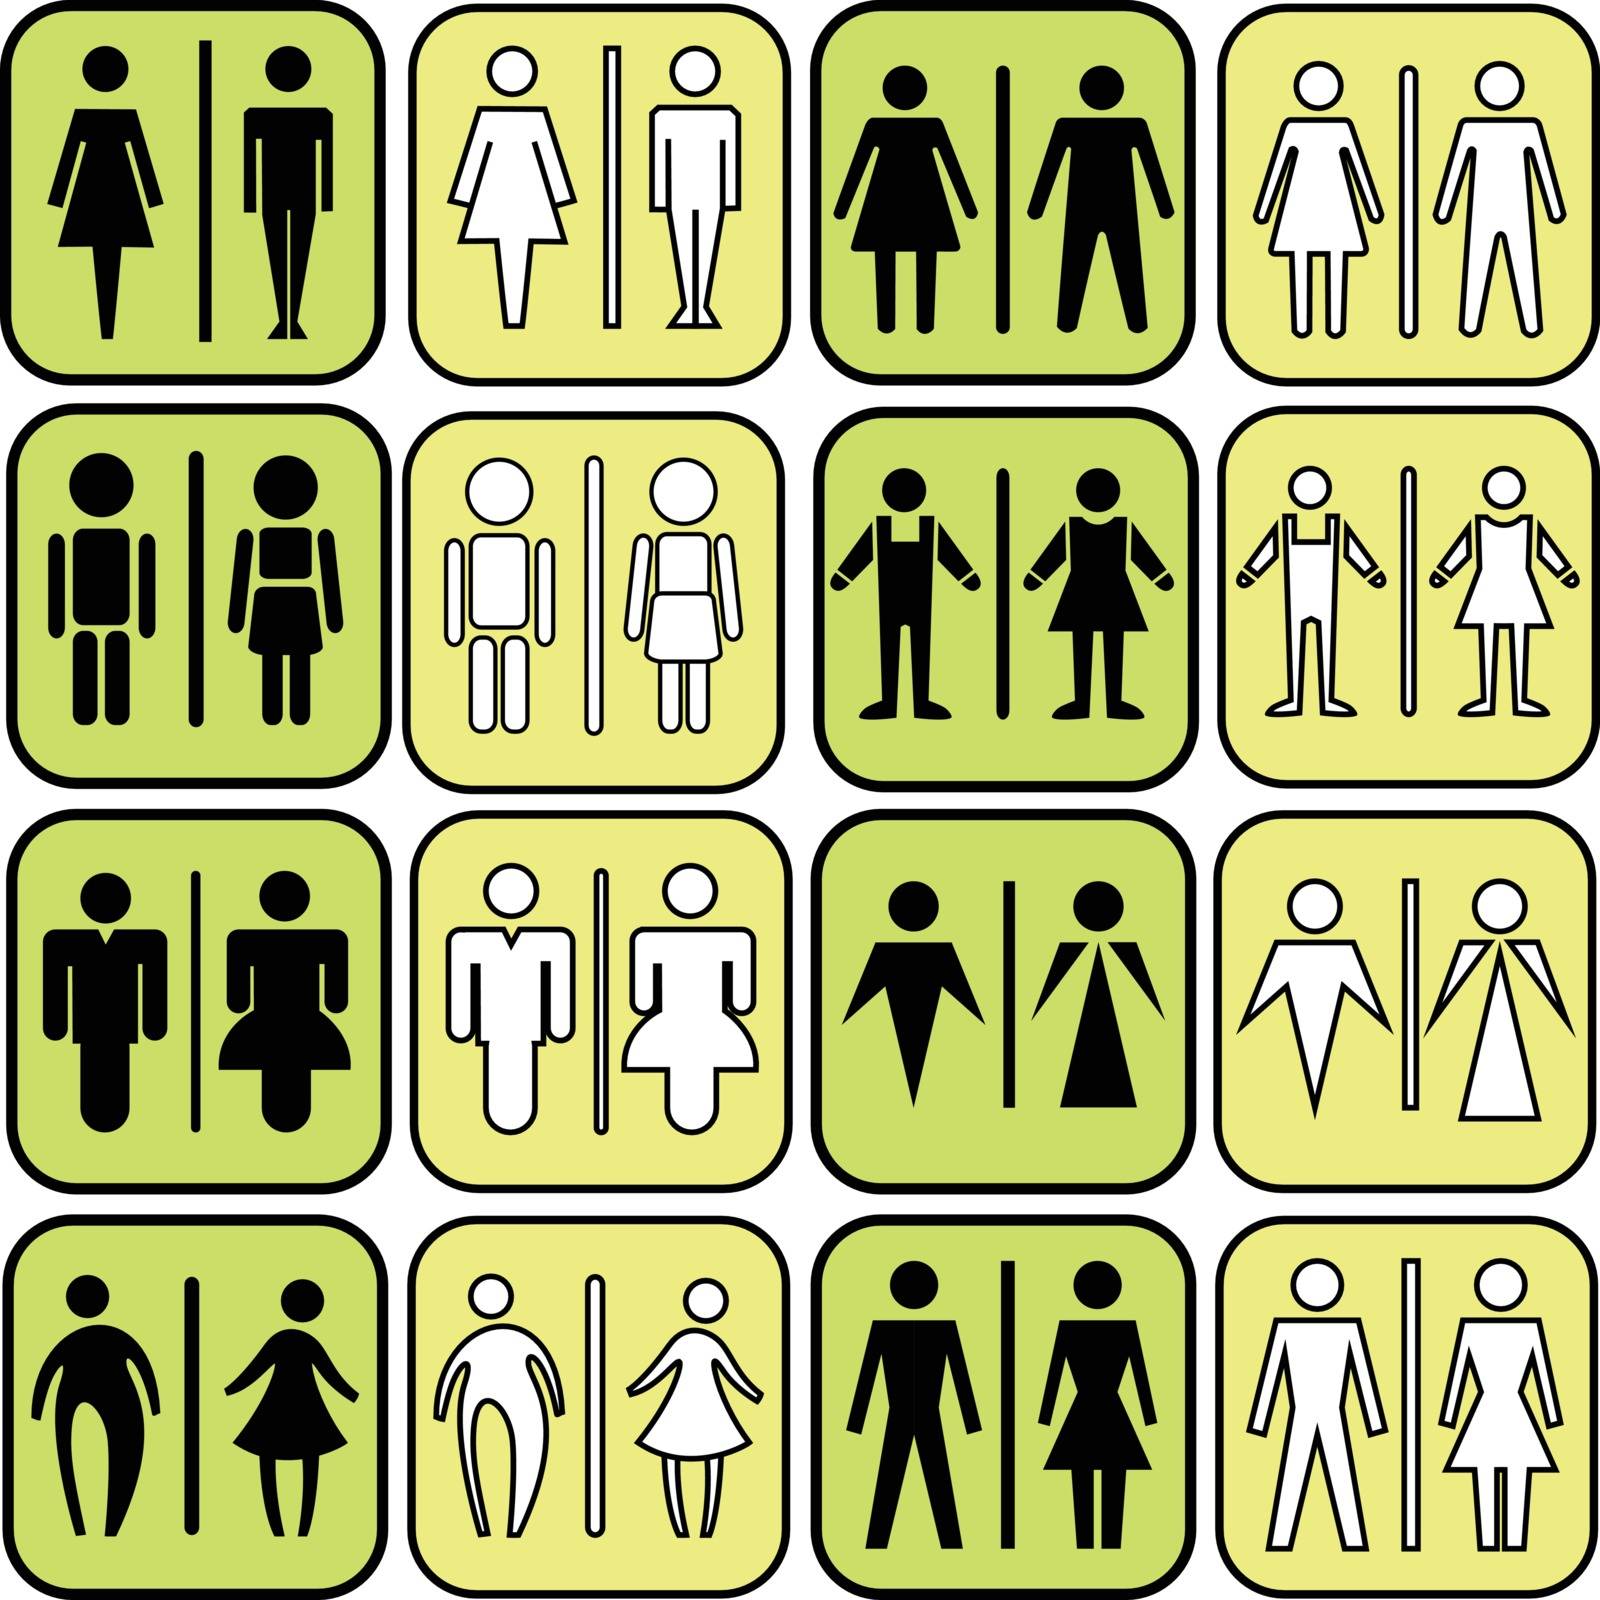 modern style of colorful toilet, restroom sign with men, women,  aged in art style design, vector set